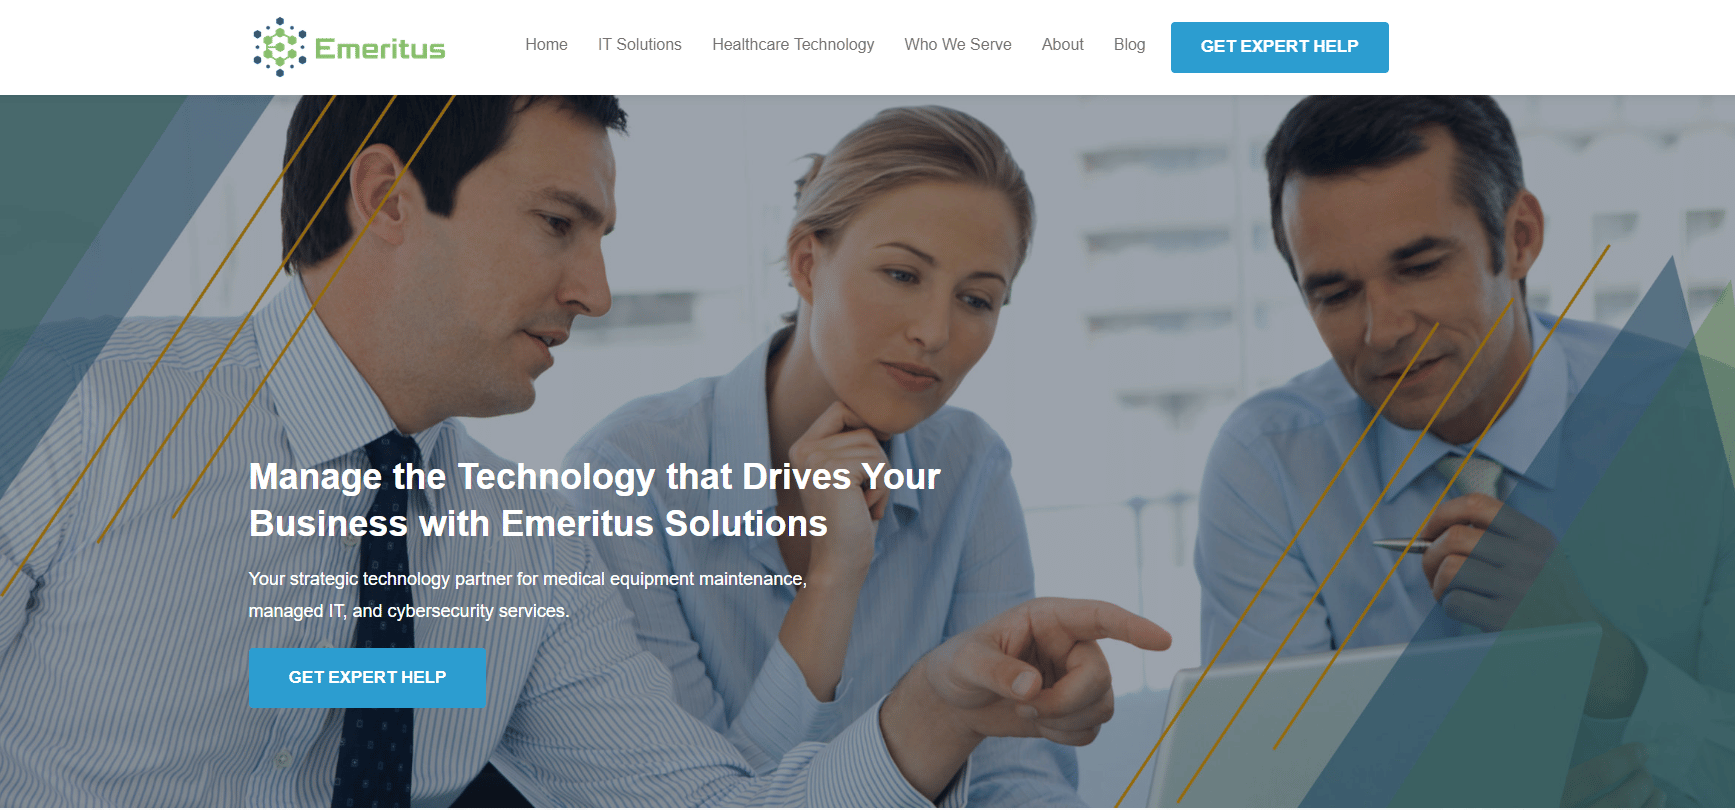 Emeritus is Connecting with New Clients Using a New Approach